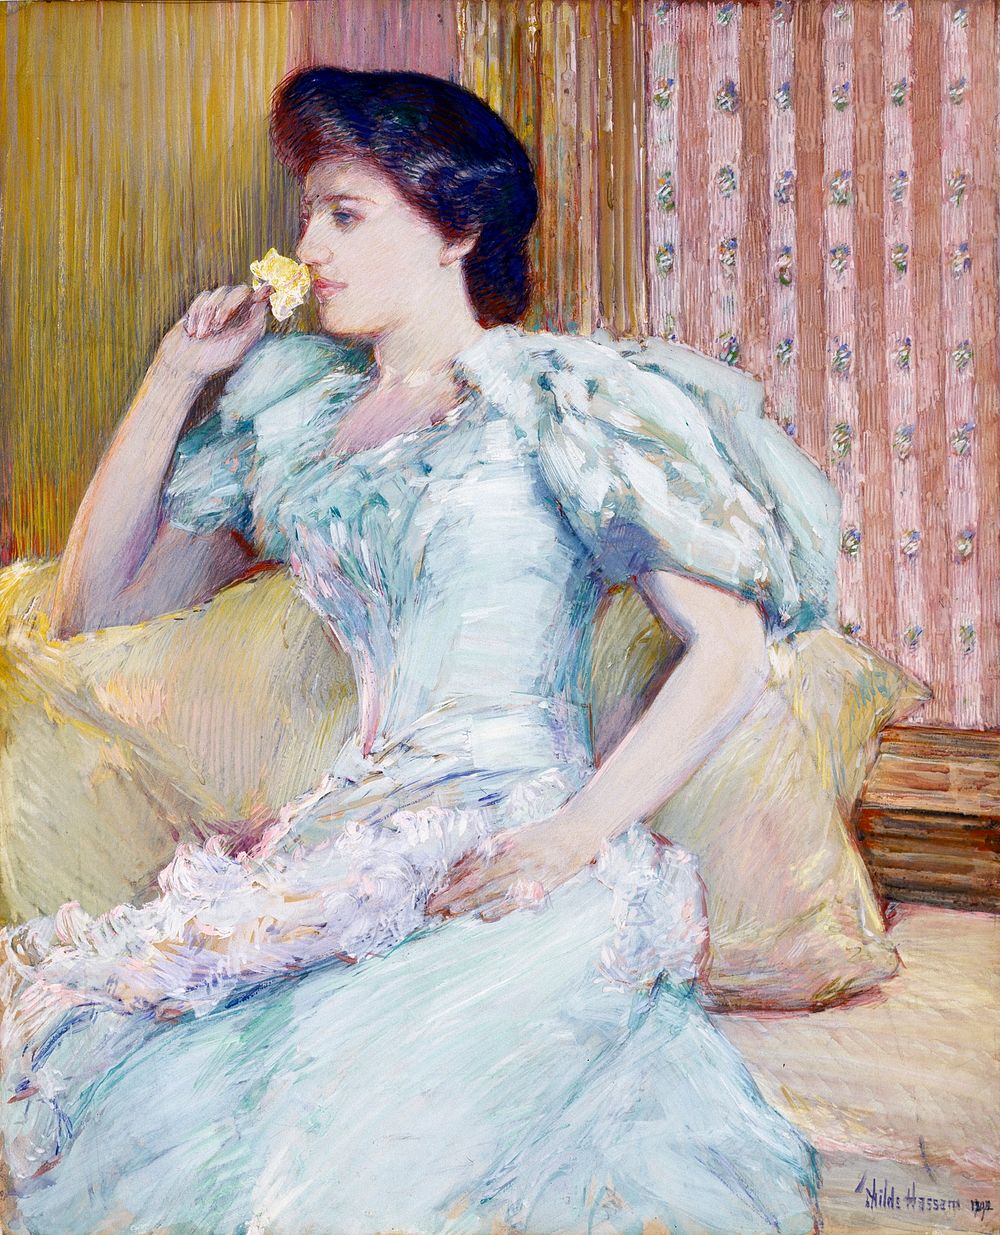 Lillie (Lillie Langtry) by Frederick Childe Hassam